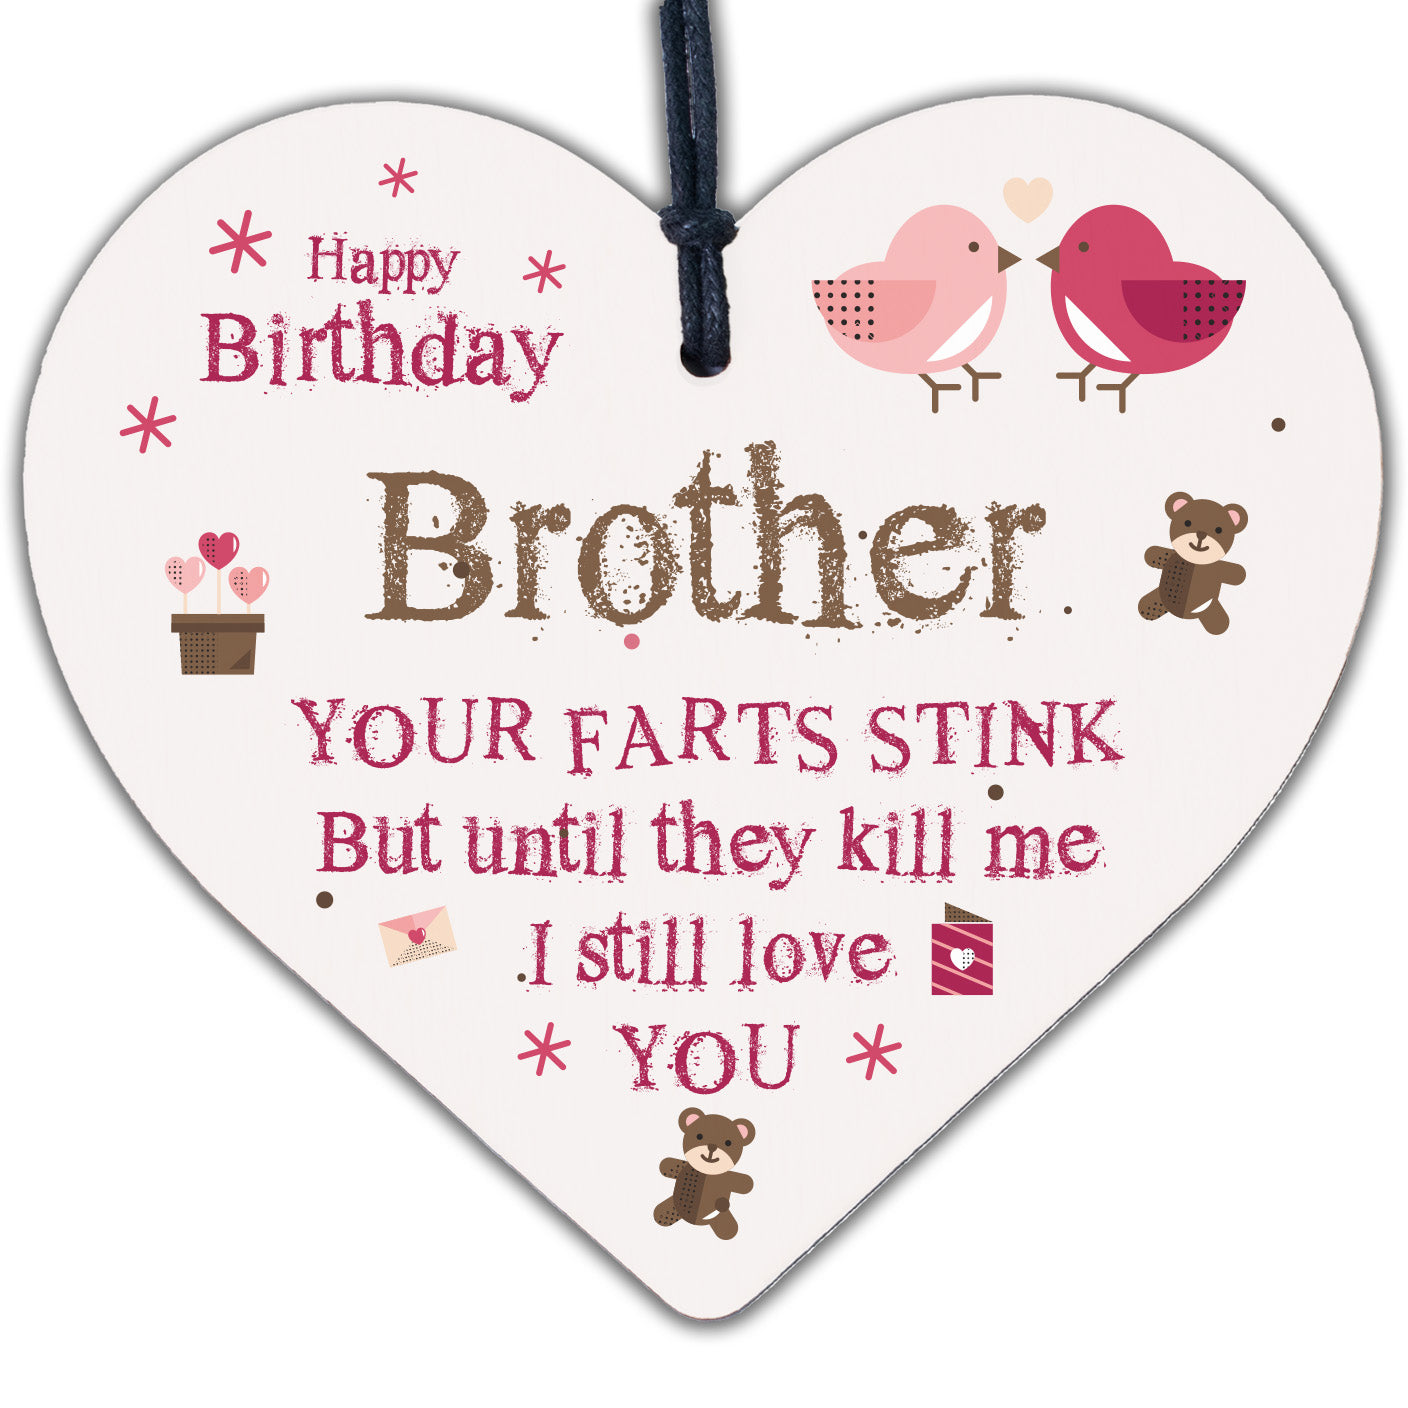 Cake, Flowers, Gift, Purses and Balloons: Sister Birthday Card |  PaperCards.com